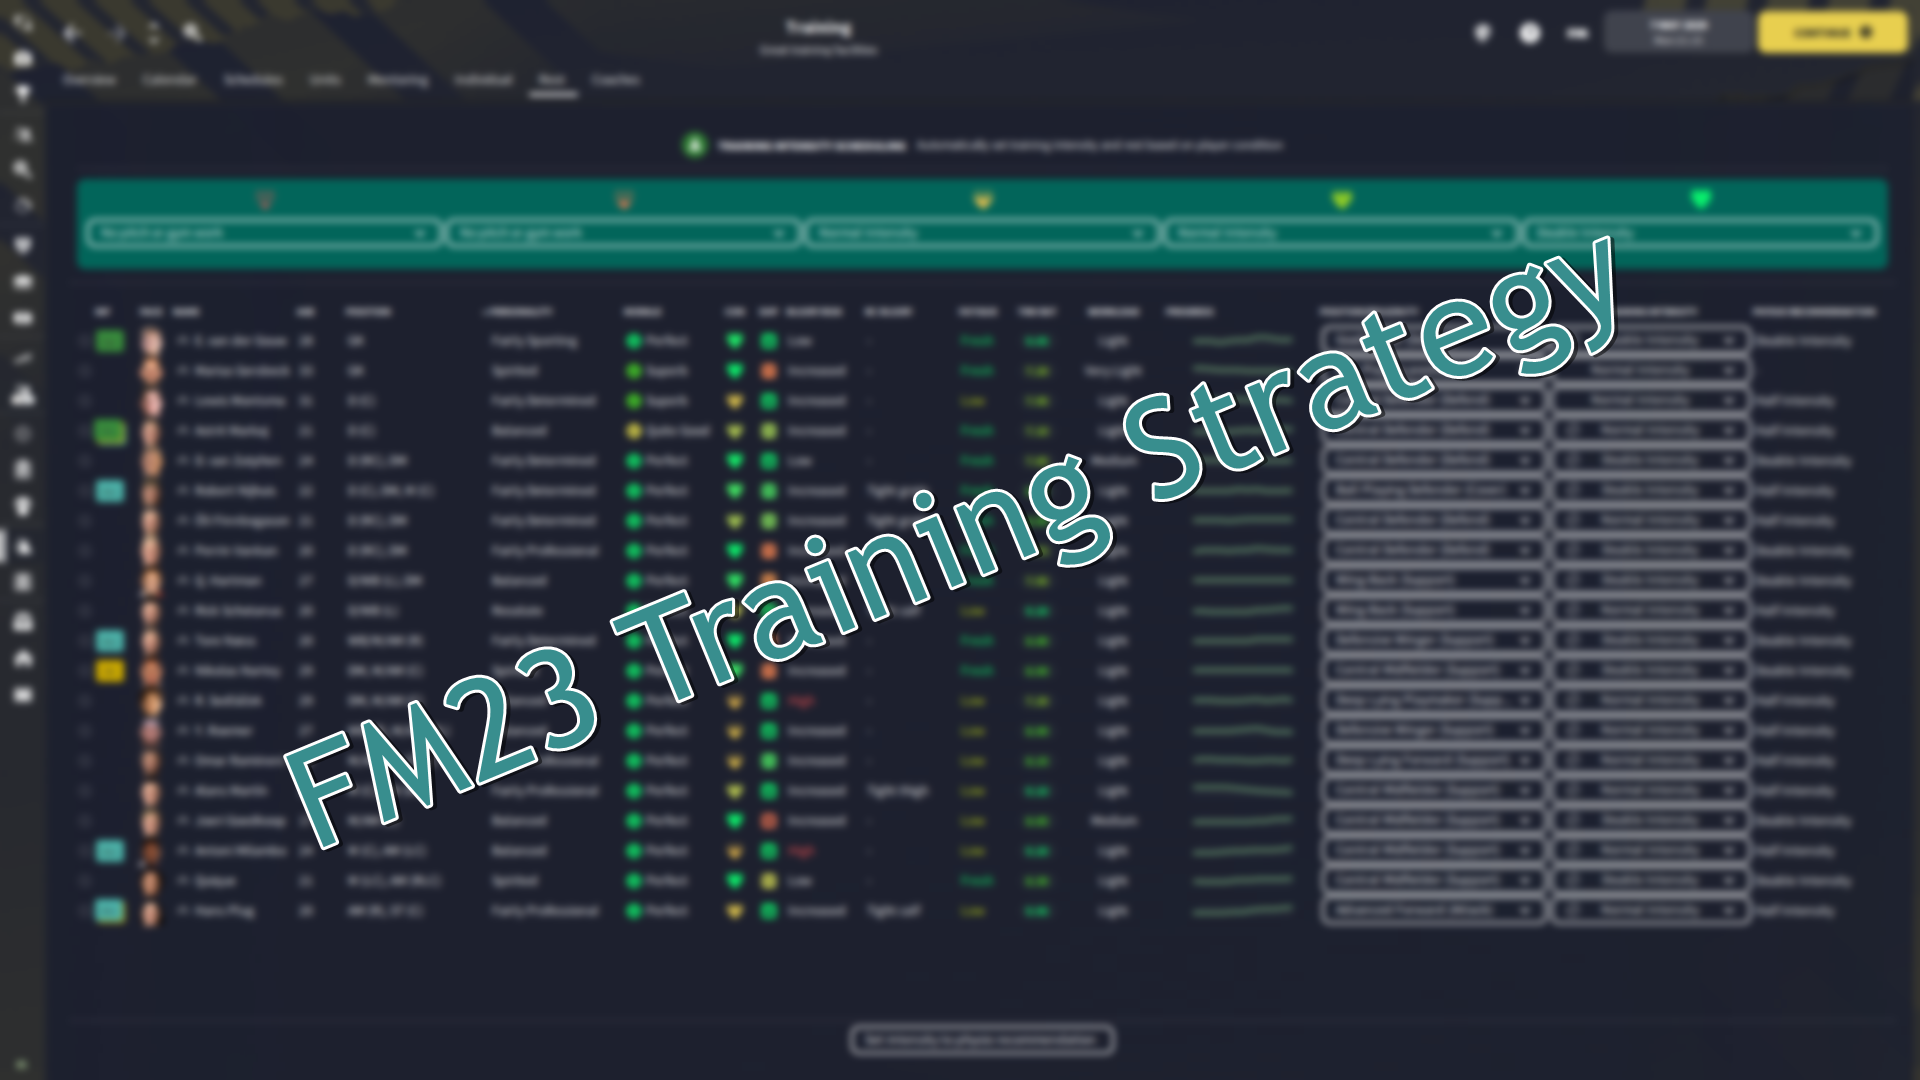 How Useful Is Rate My Tactic? Experimenting With Its Data Ahead Of FM21 -  Tactics, Training & Strategies Discussion - Sports Interactive Community